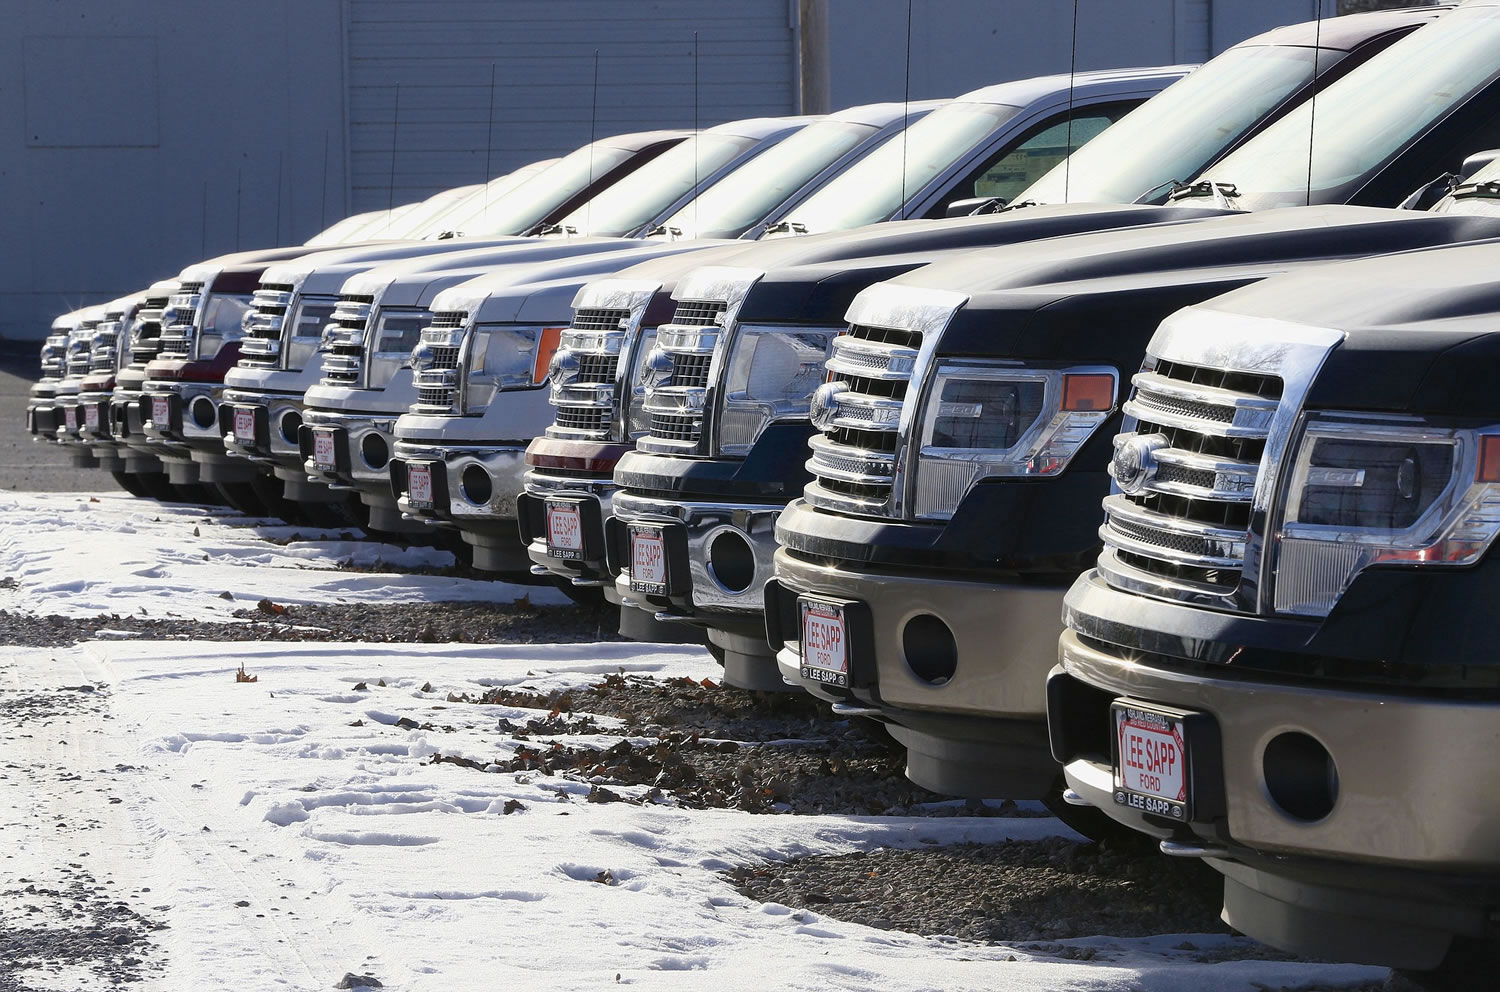 Ford F-150 pickup trucks are lined up Jan. 13 at the Lee Sapp Ford dealership in Ashland, Neb. With cheaper gasoline in the tank, some car dealers find they have too many smaller fuel-efficient cars, when trucks and sports cars might sell better.